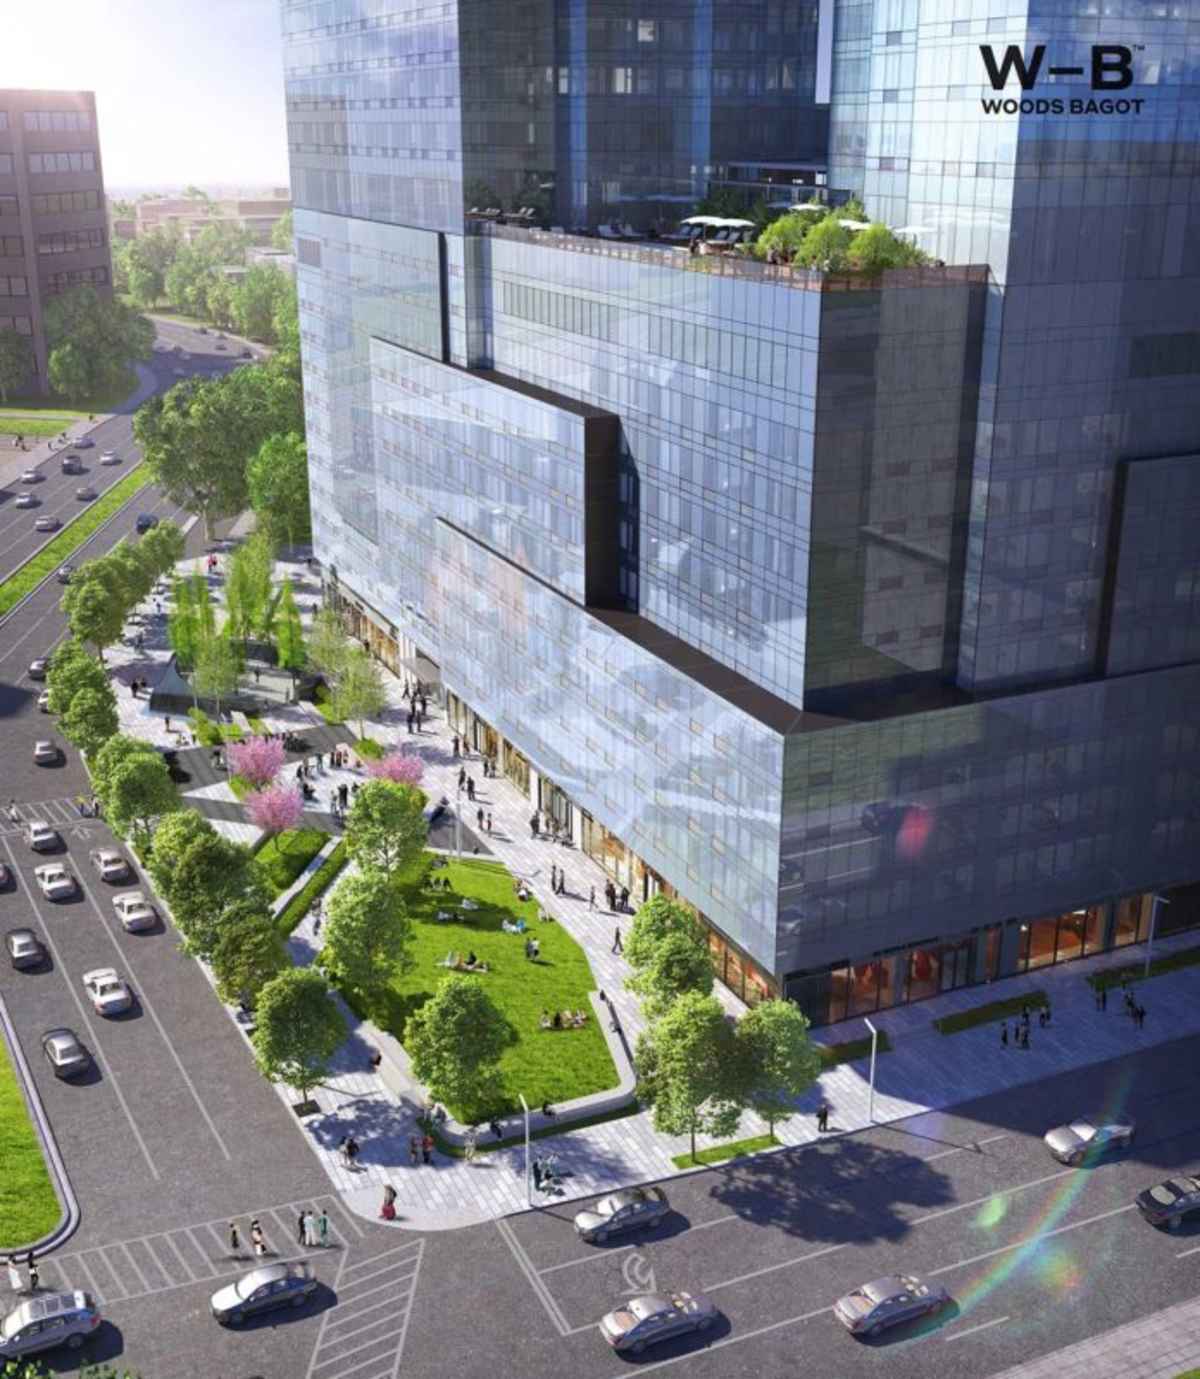 2 Million SQFT Tower Project Rises in Journal Square